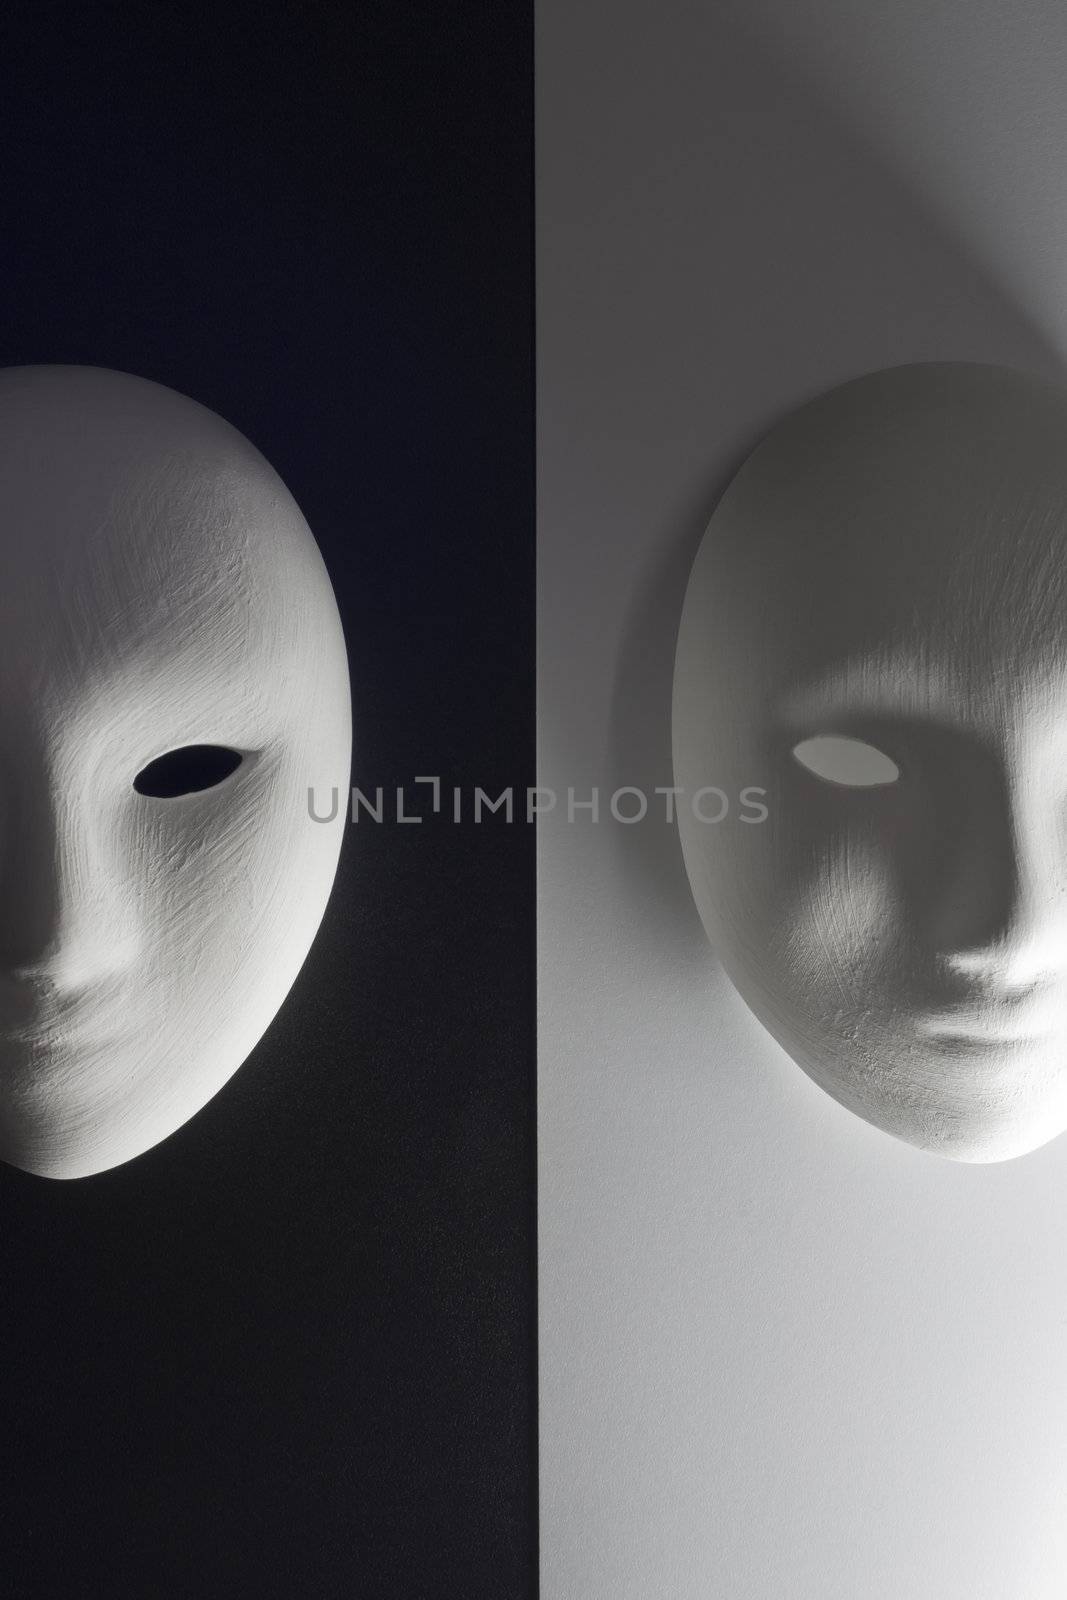 plaster mask in studio by audfriday13